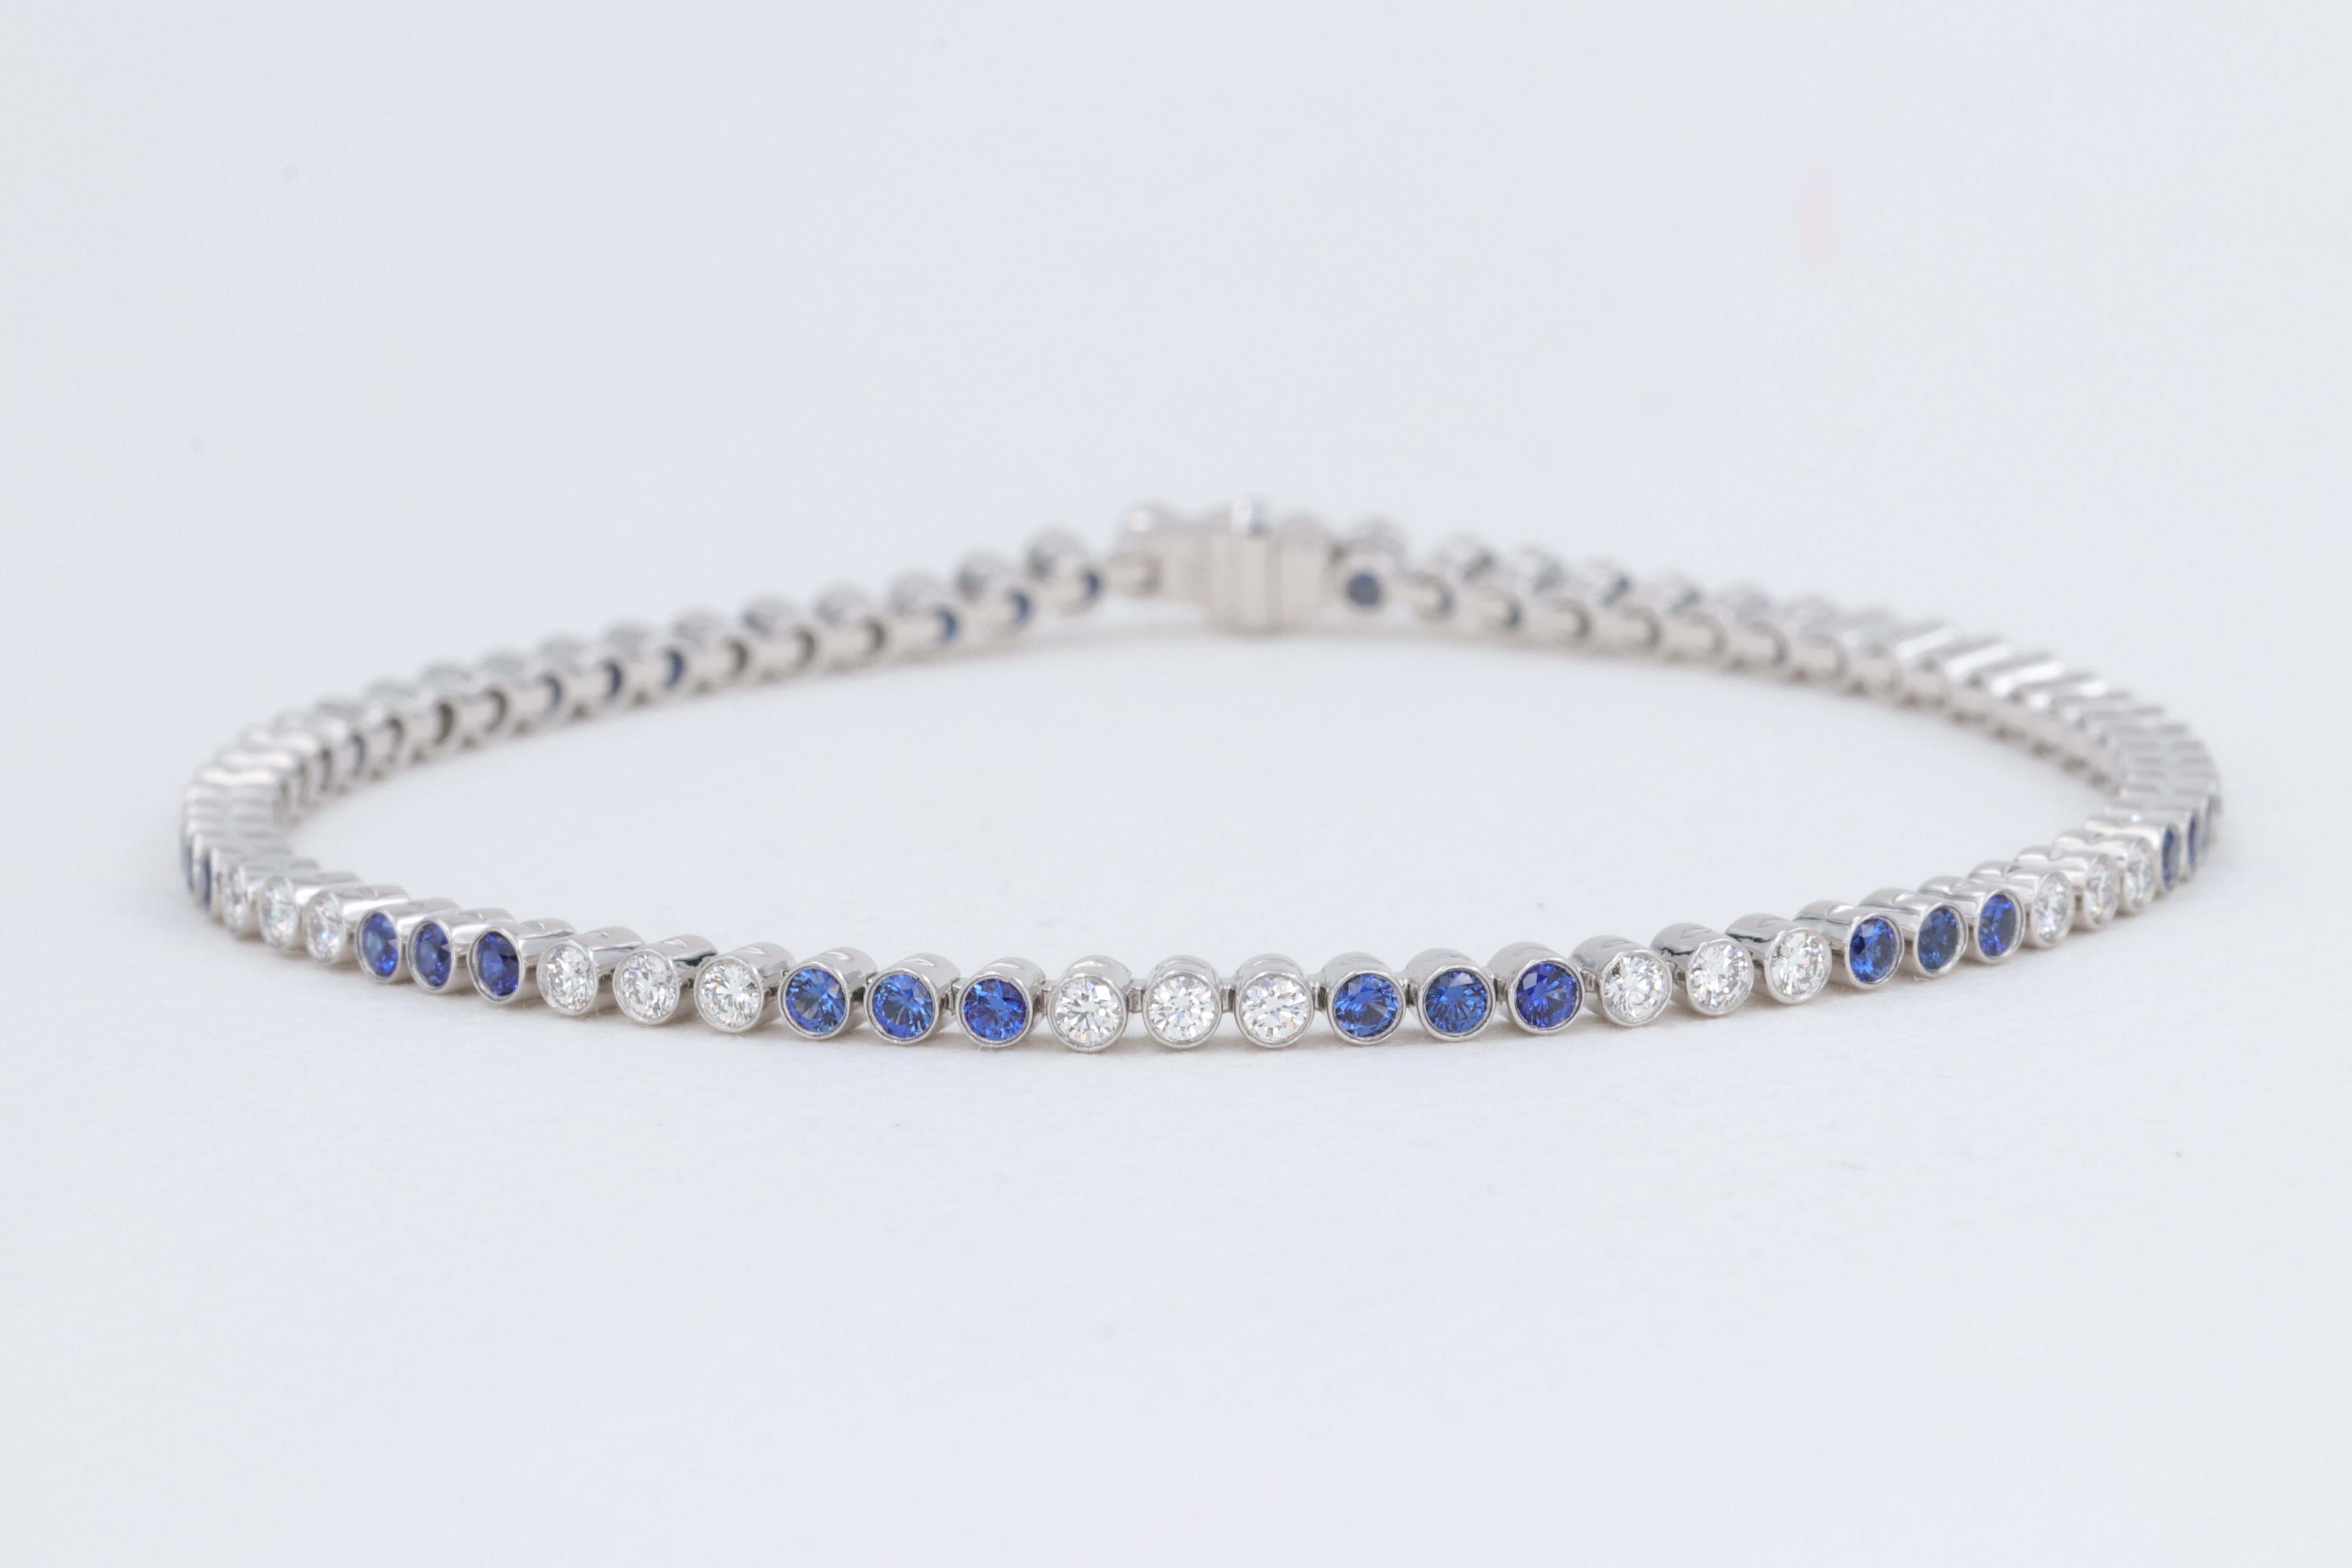 Tiffany & Co. Jazz Diamond and Sapphire Bezel Set Bracelet in Platinum in Box

Includes Original Tiffany & Co Bracelet Box

Stones:

Diamonds - 36 = 0.70ctw 
Color - D to F
Clarity - VS+

Sapphires - 36 = 0.85ctw 
Color - Vivid Blue 
Clarity - Eye